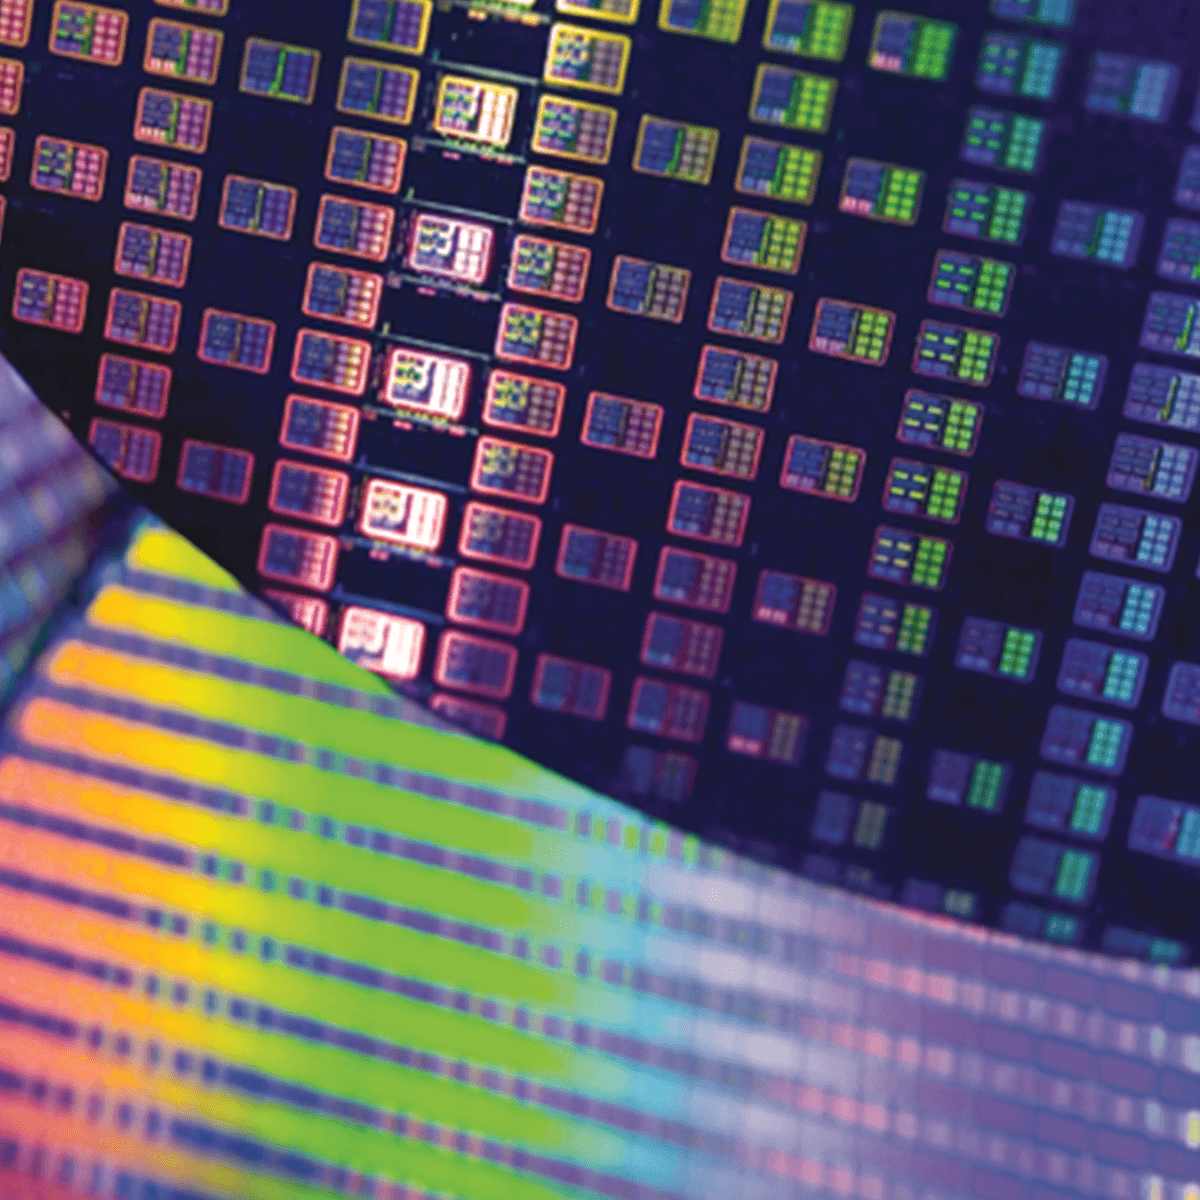 A close up image of a sheet of microchips